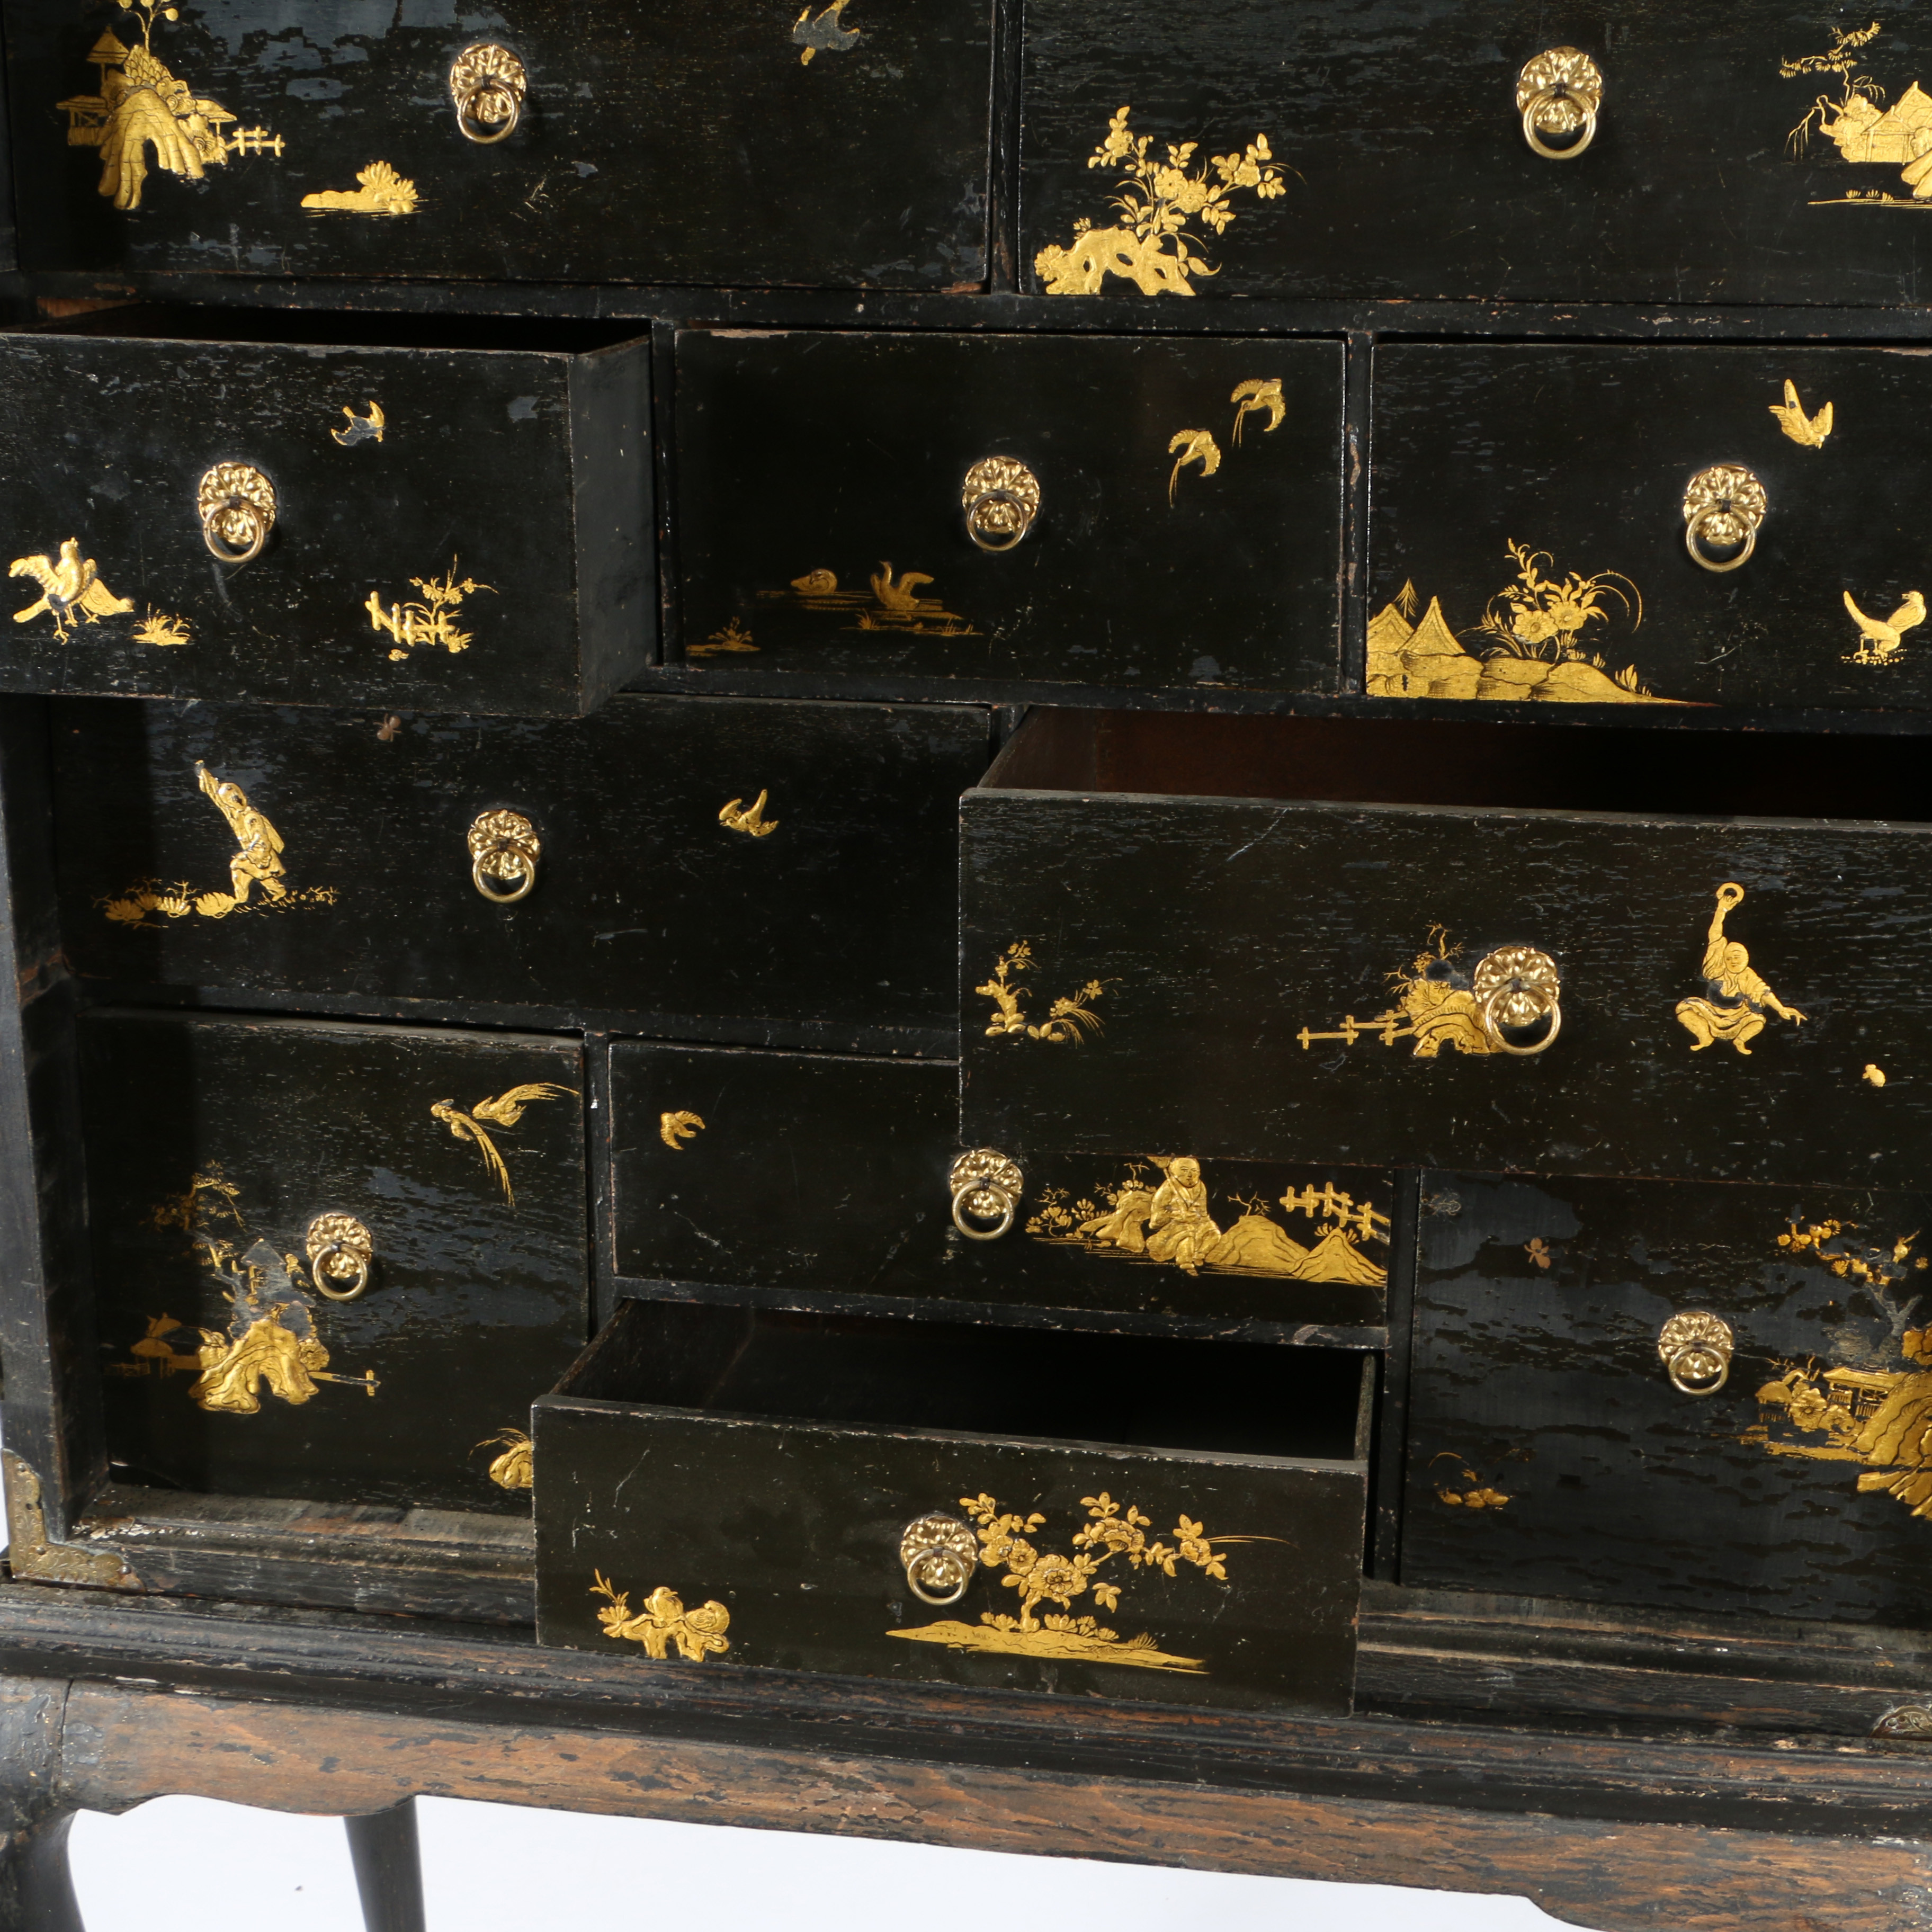 AN EARLY 18TH CENTURY JAPANESE EXPORT BLACK LACQUERED CABINET-ON-STAND, CIRCA 1720. - Image 3 of 4